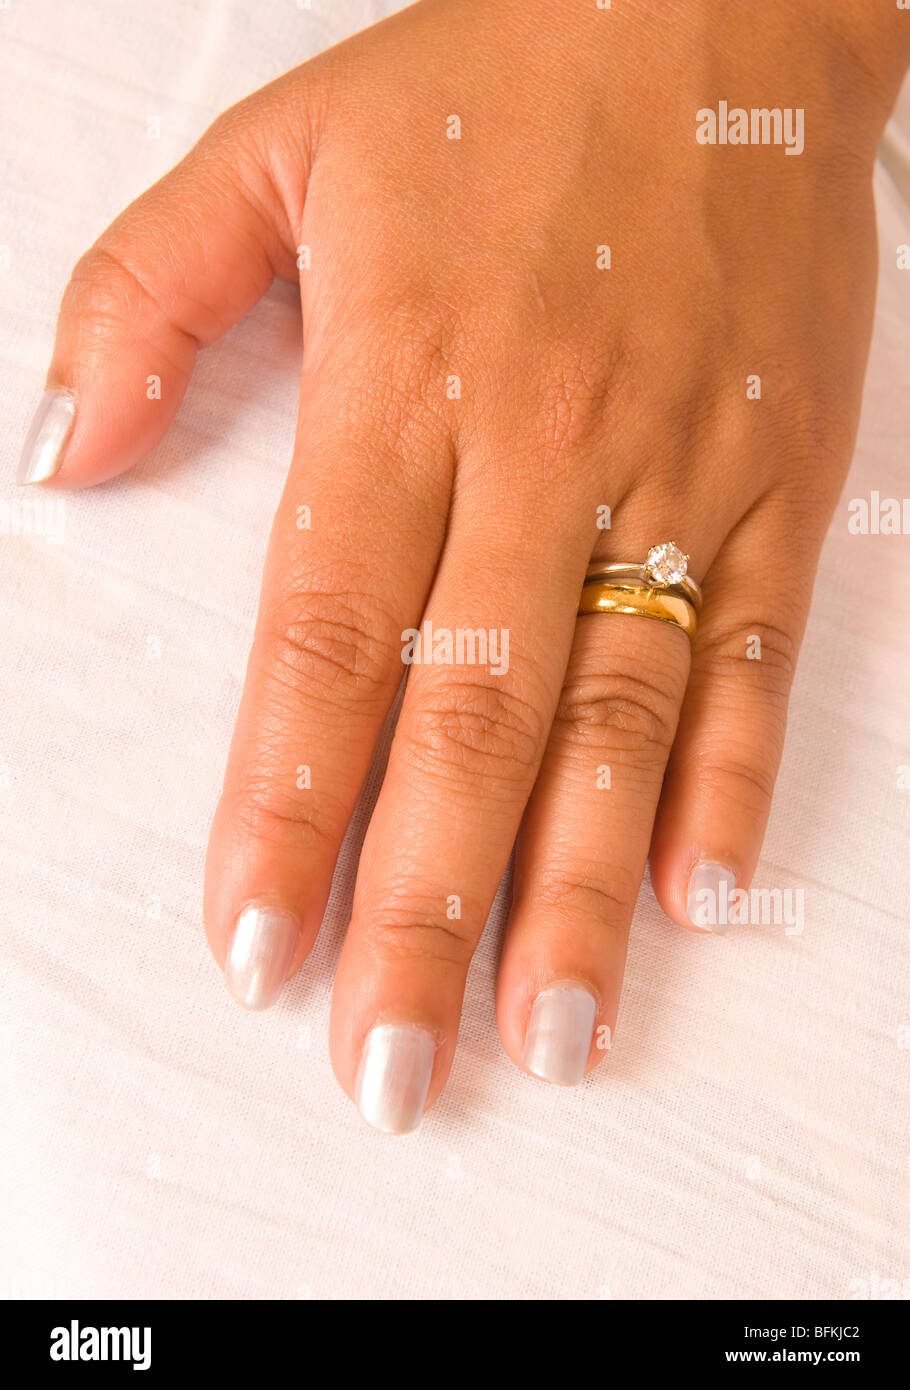 Female Right Ring Finger Meaning: Symbolism and Significance